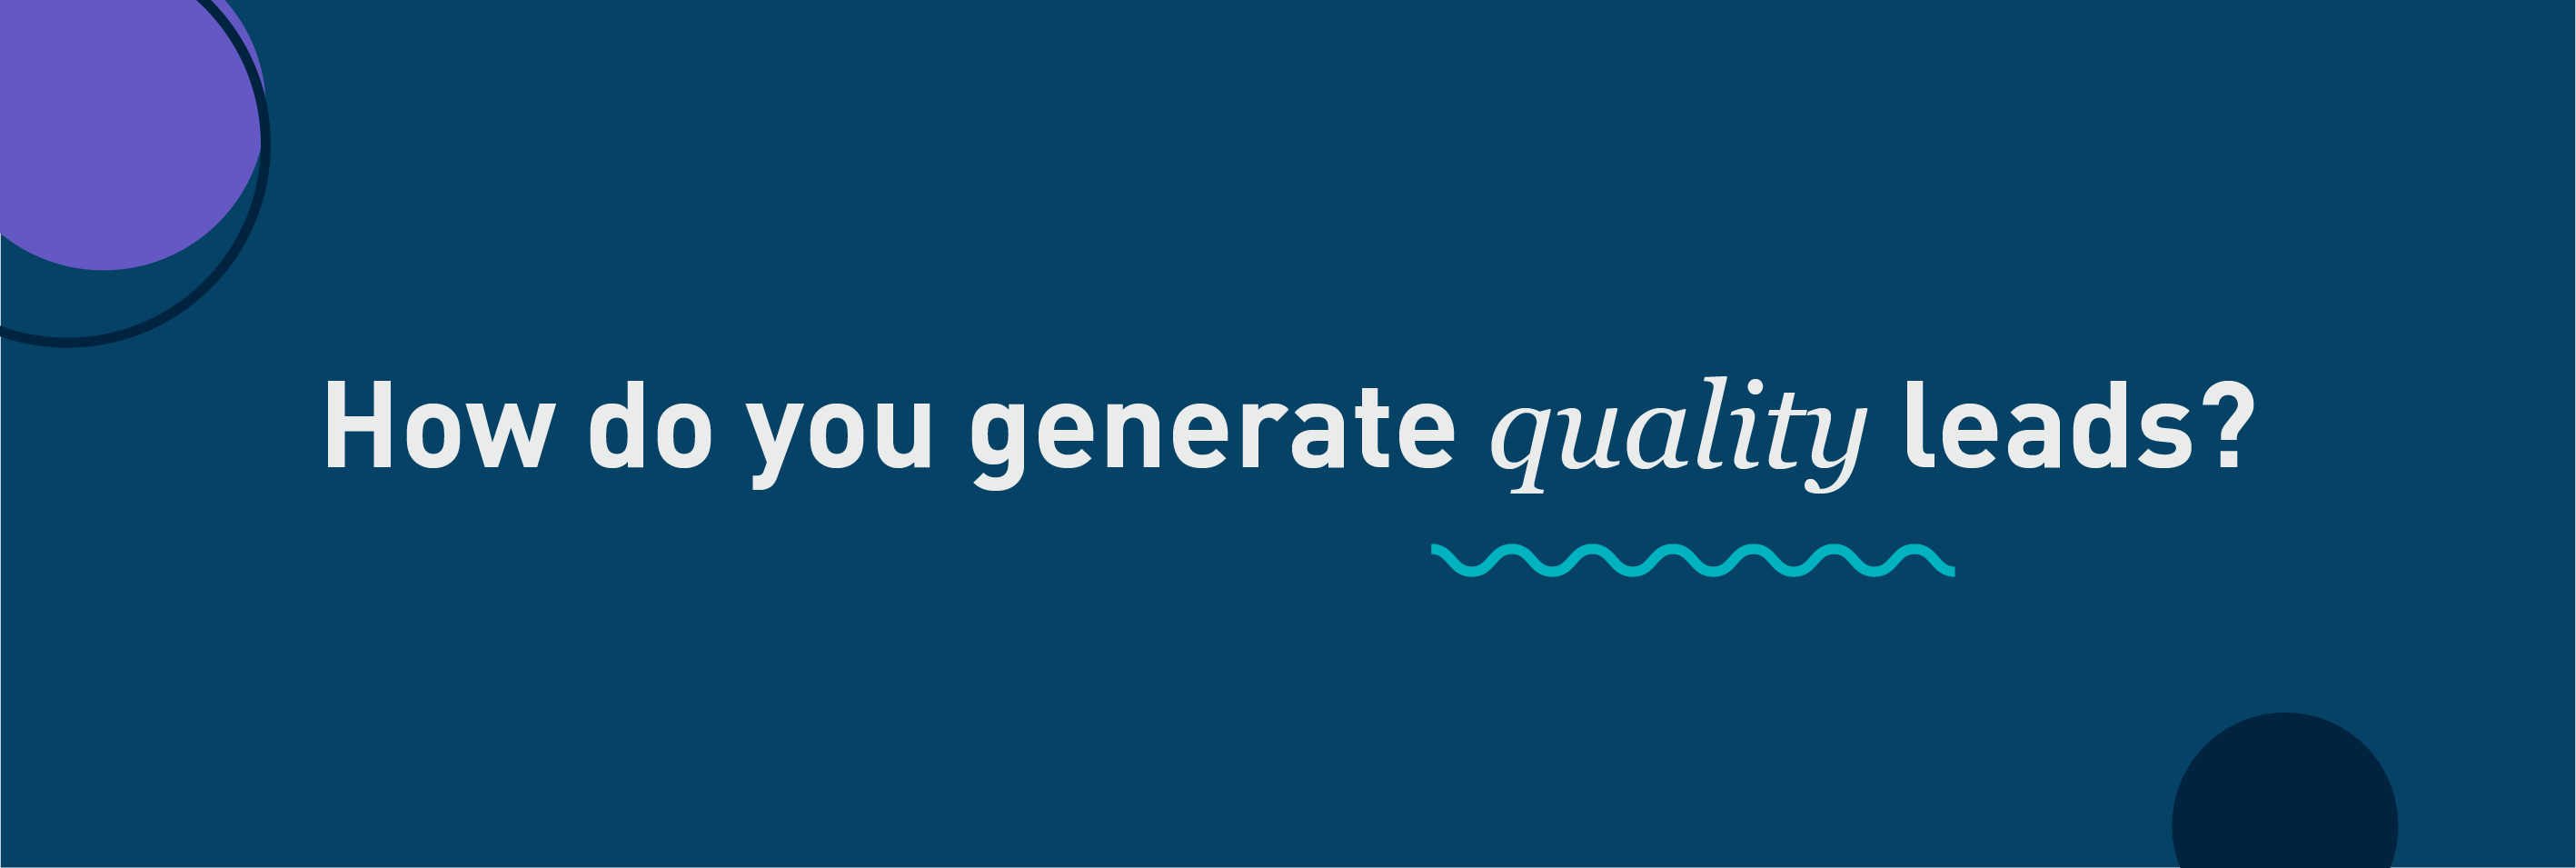 How do you generate quality leads?